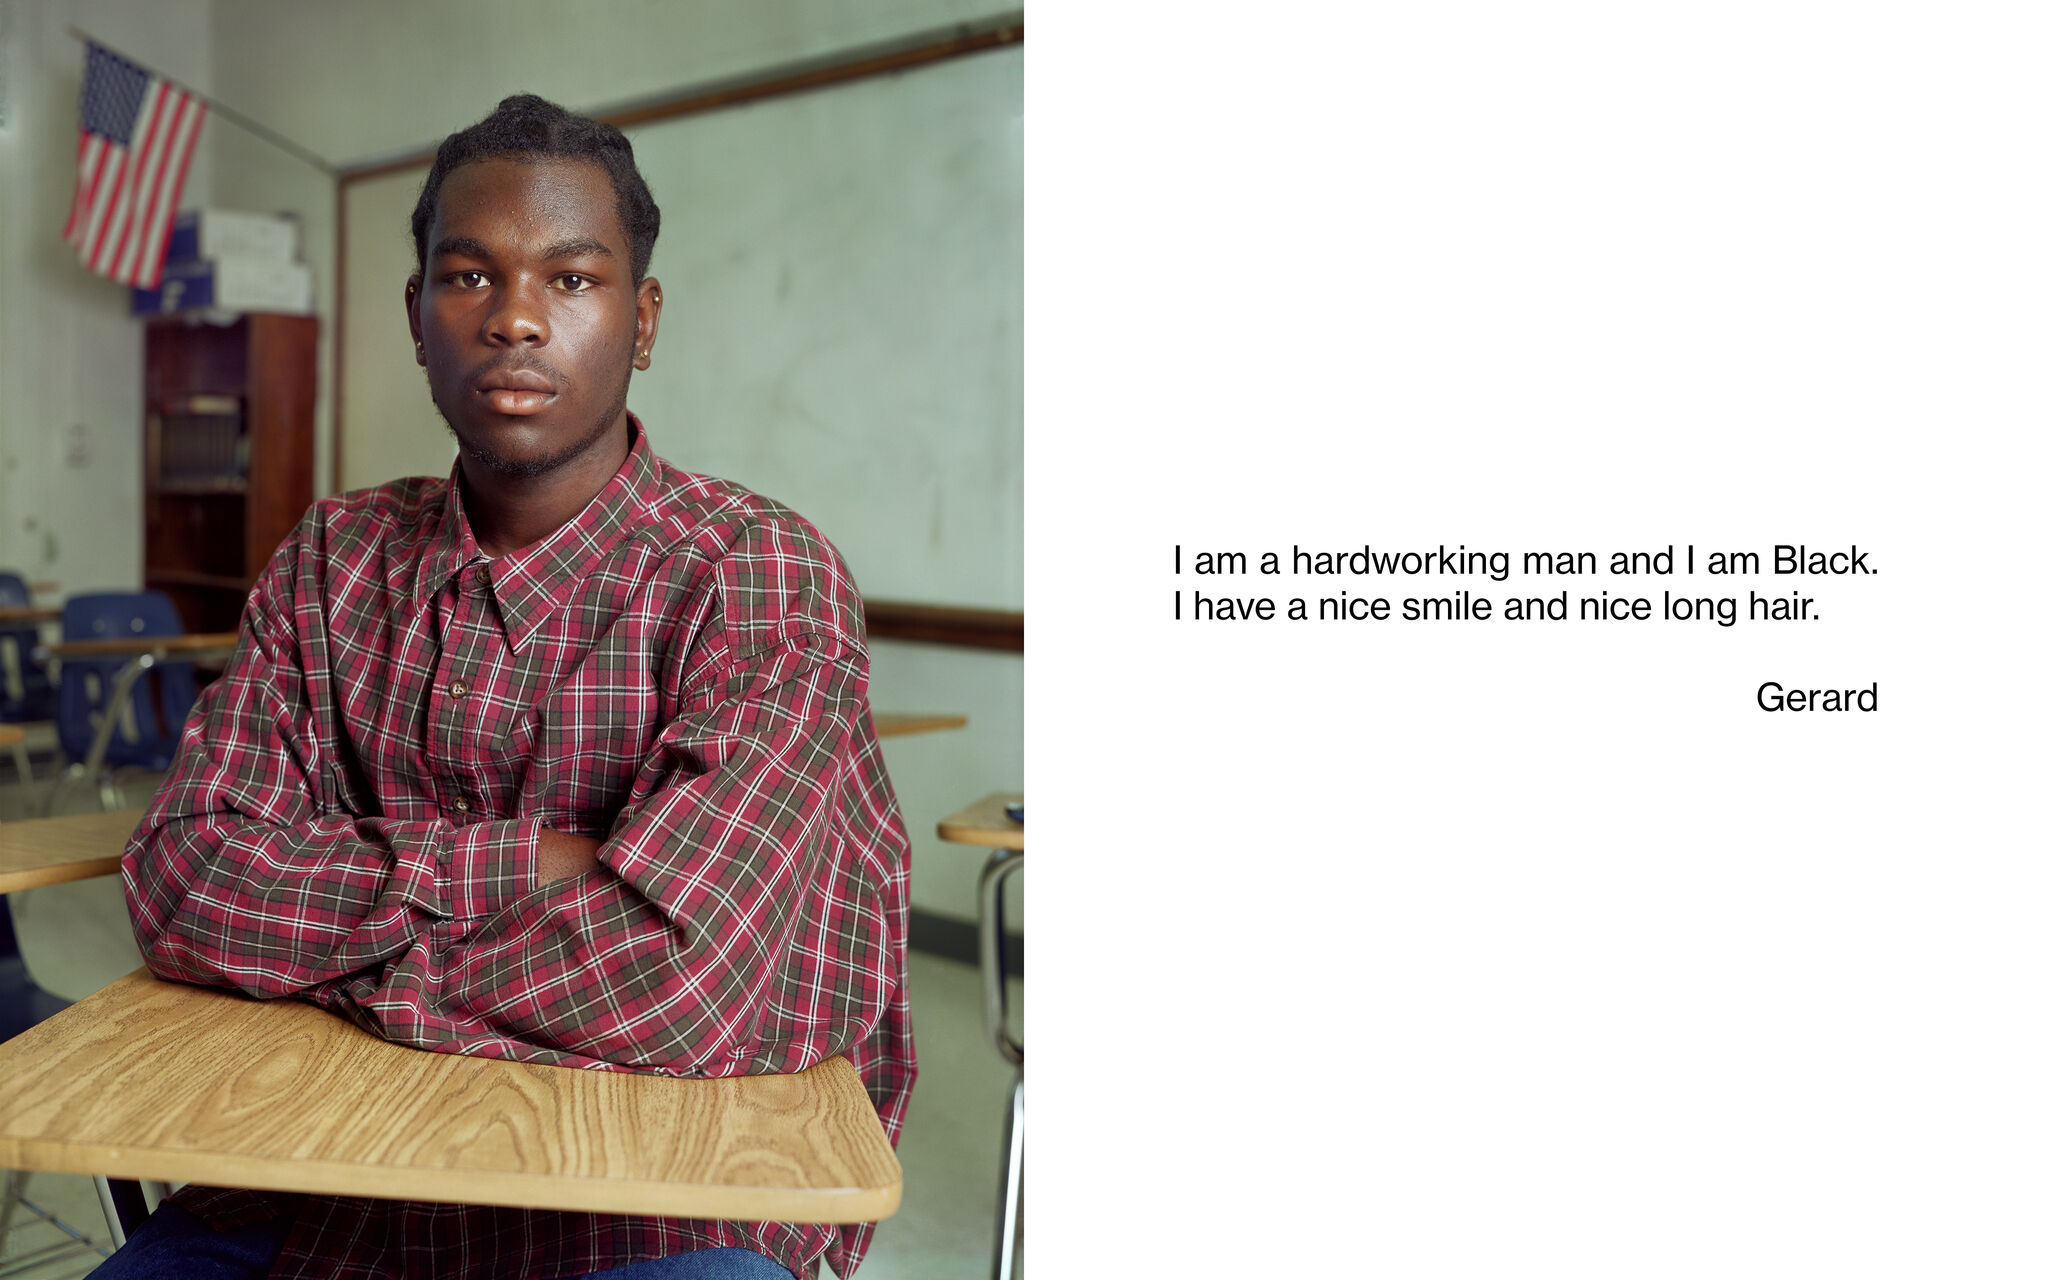 A portrait of a student resting their arms on a school desk and facing the camera. "I am a hardworking man and I am Black. I have a nice smile and nice long hair. Gerard"